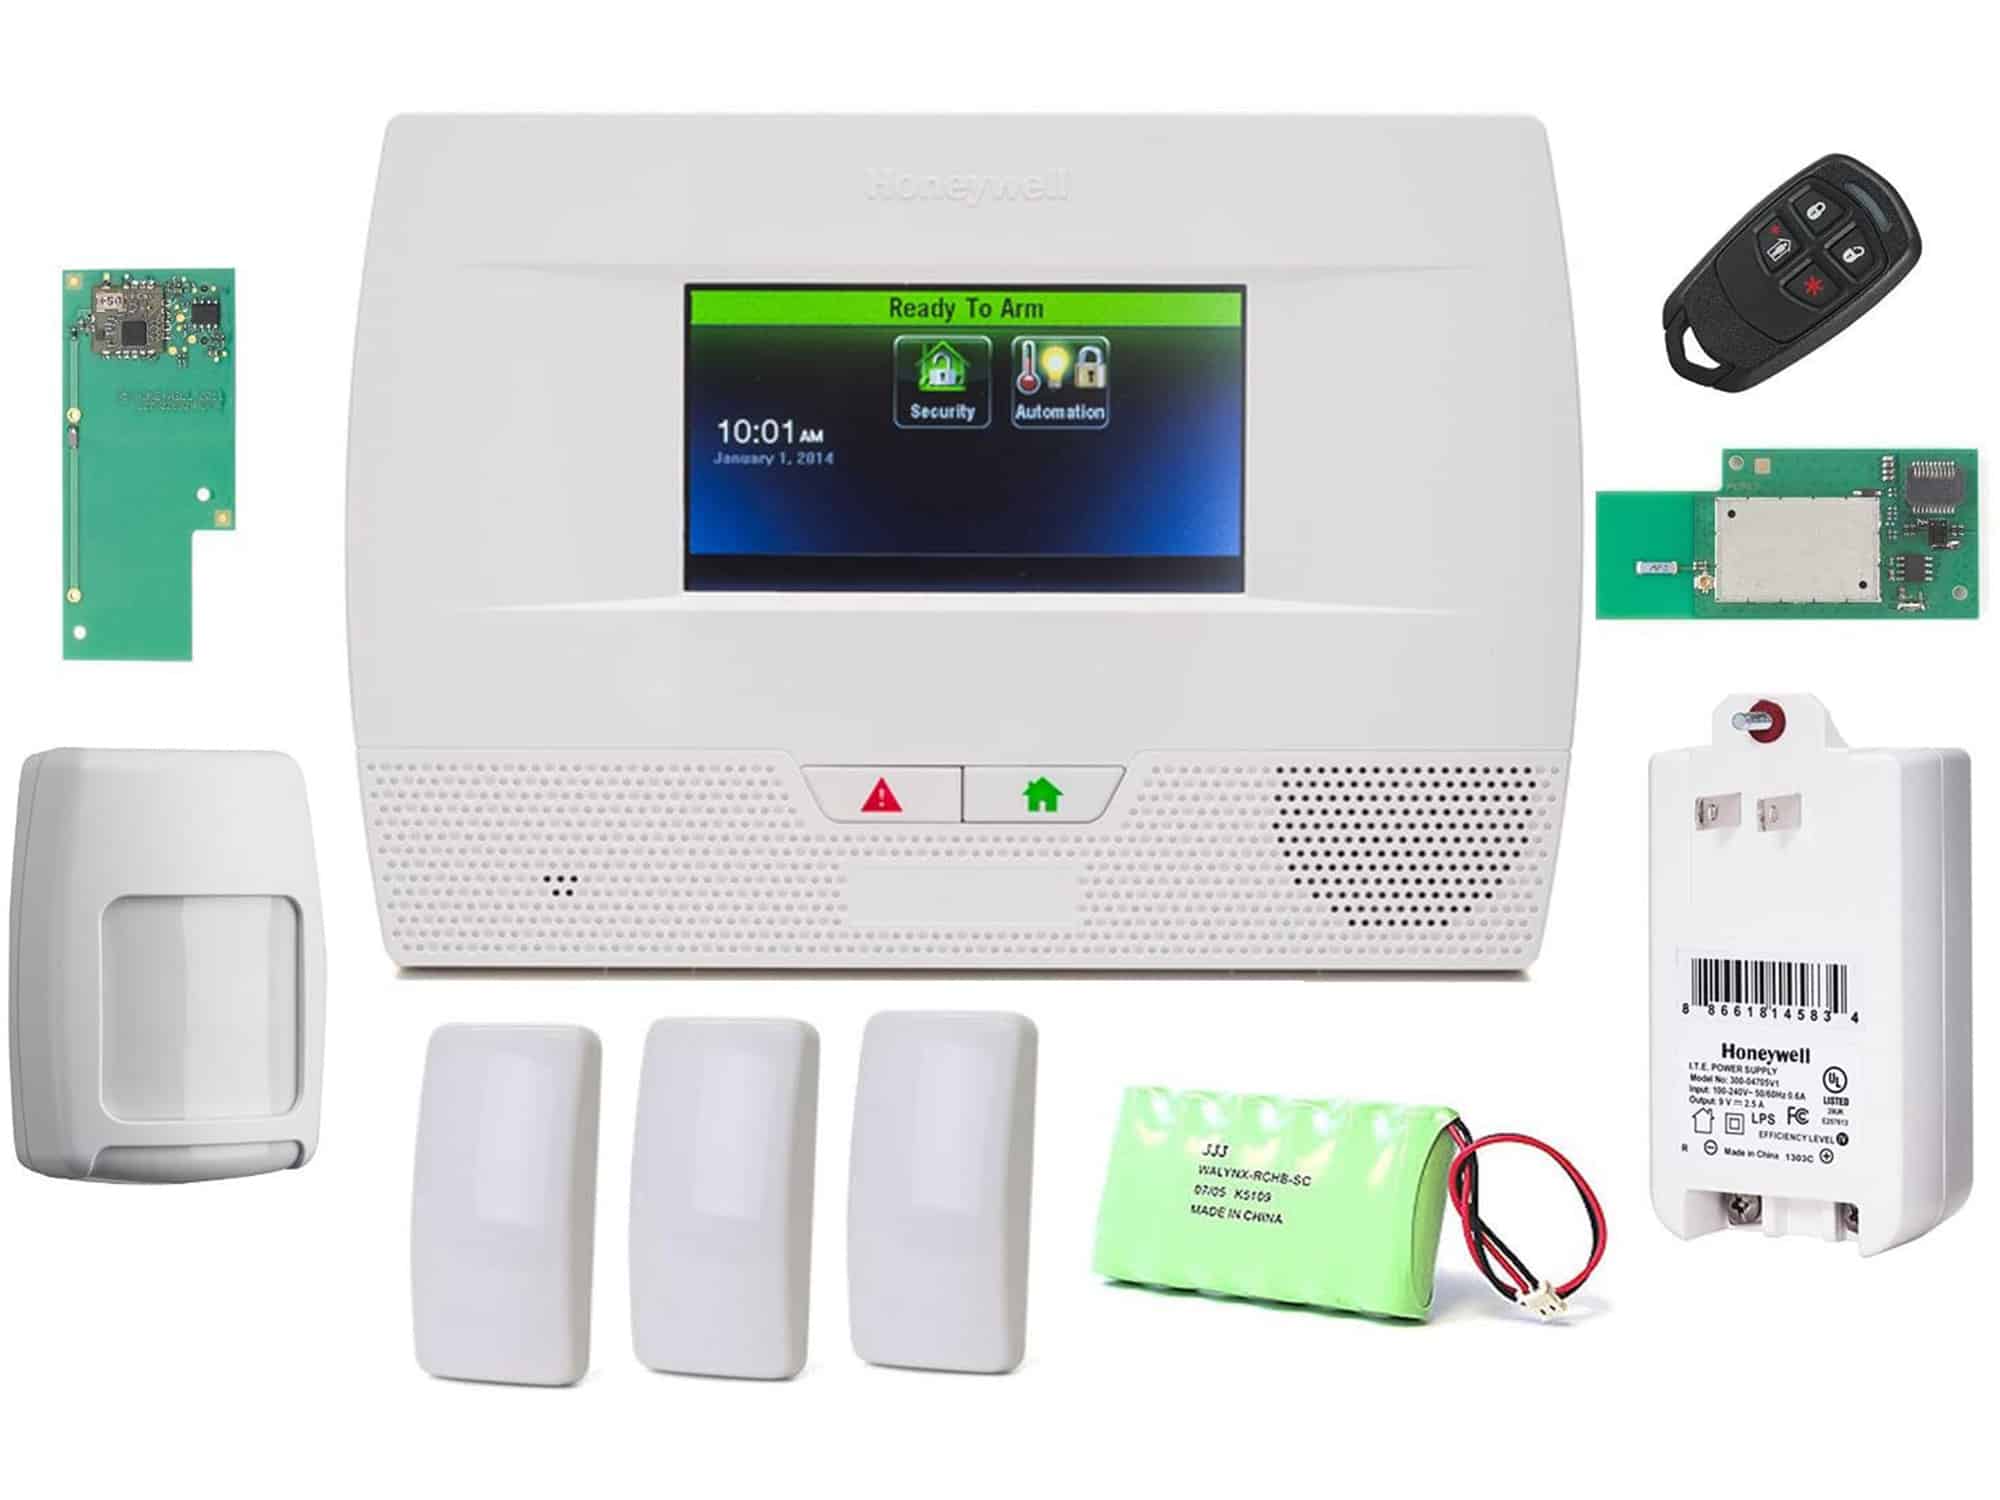 Honeywell Lynx Touch L5210 Home Automation/Security Alarm Kit with WiFi and Zwave Module